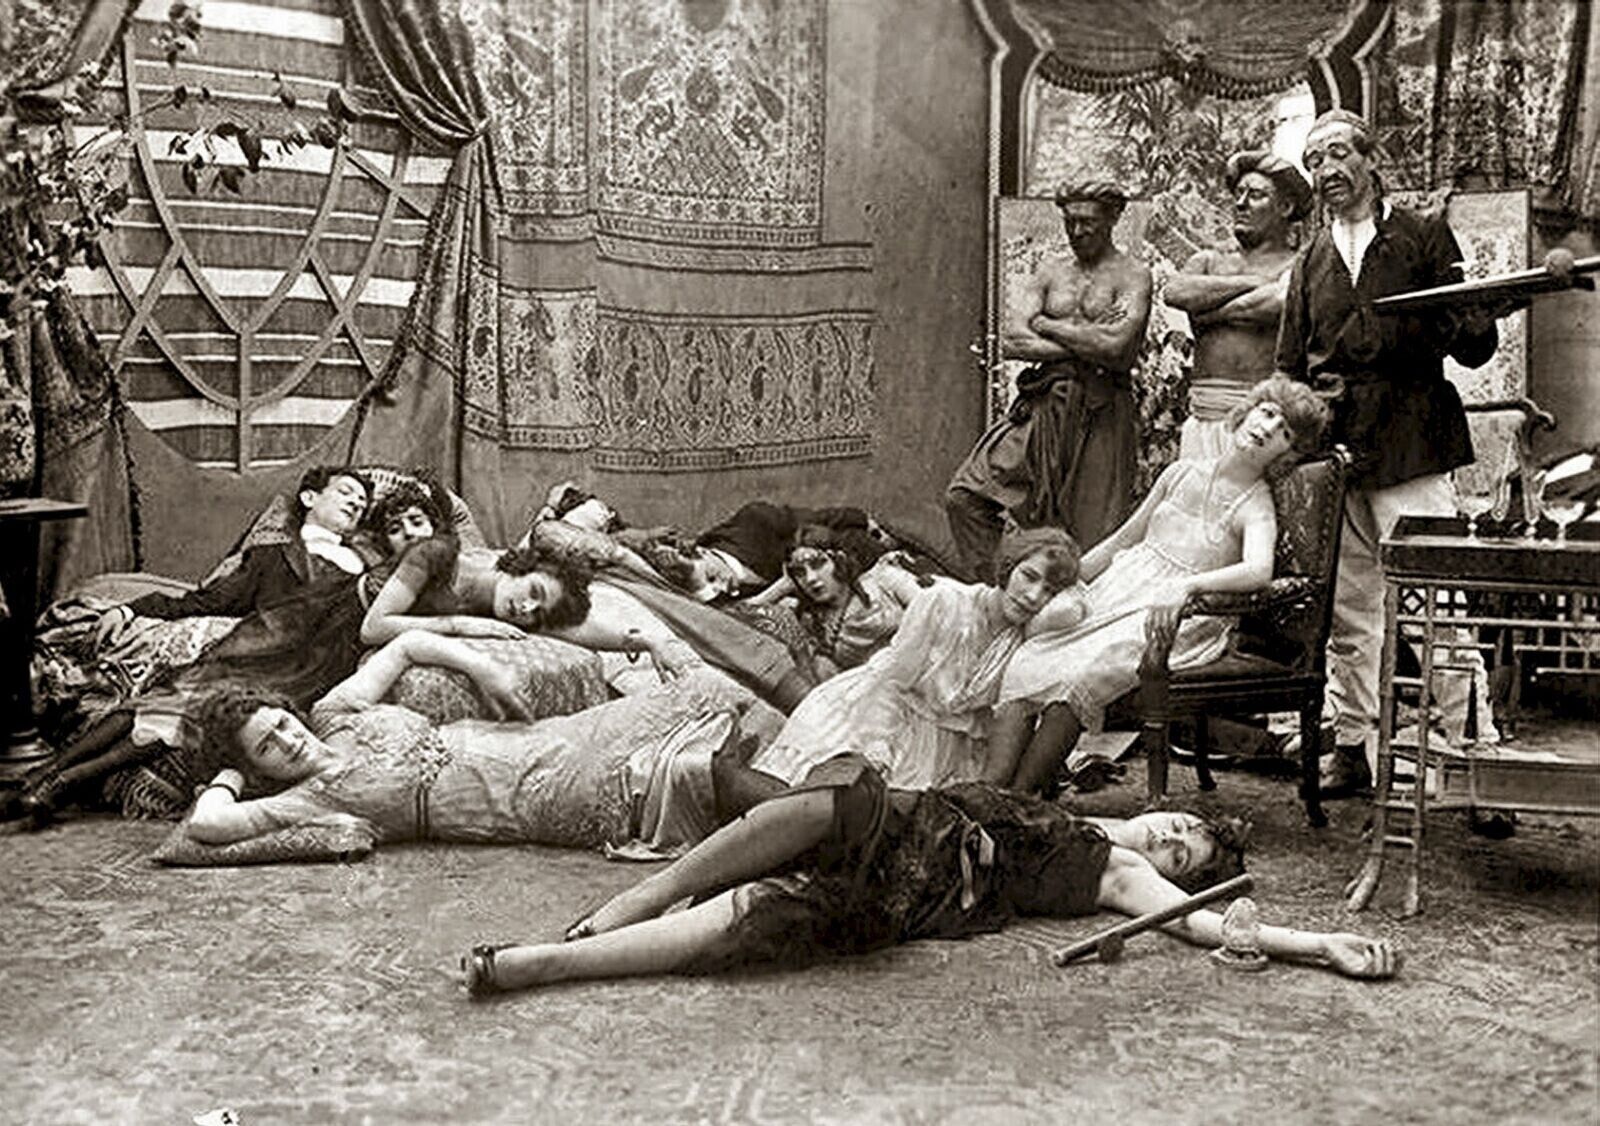 1918 FRENCH OPIUM Den Drug Party Classic Historic Picture Photo 5x7